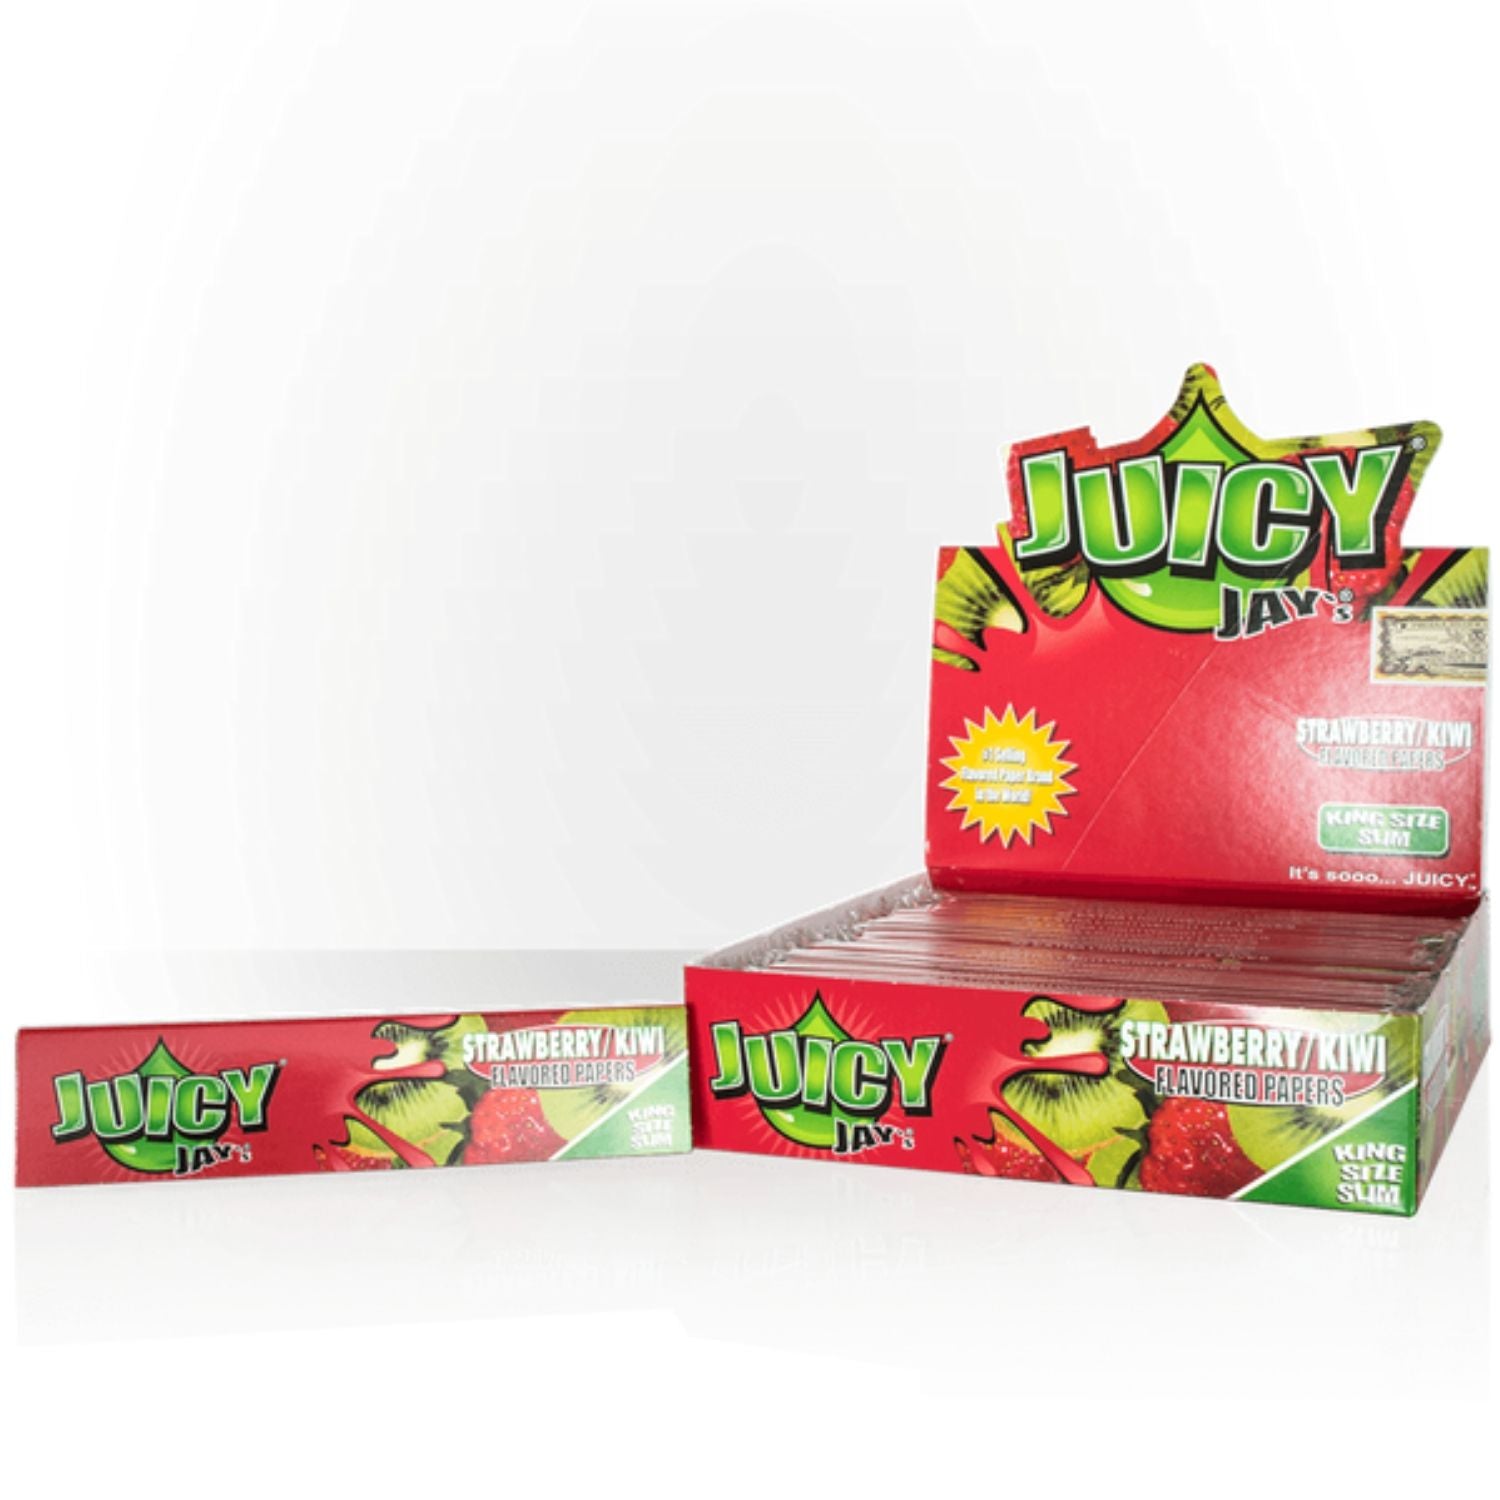 Juicy Jay Rolling Papers - Strawberry - Kiwi Flavor - KSS